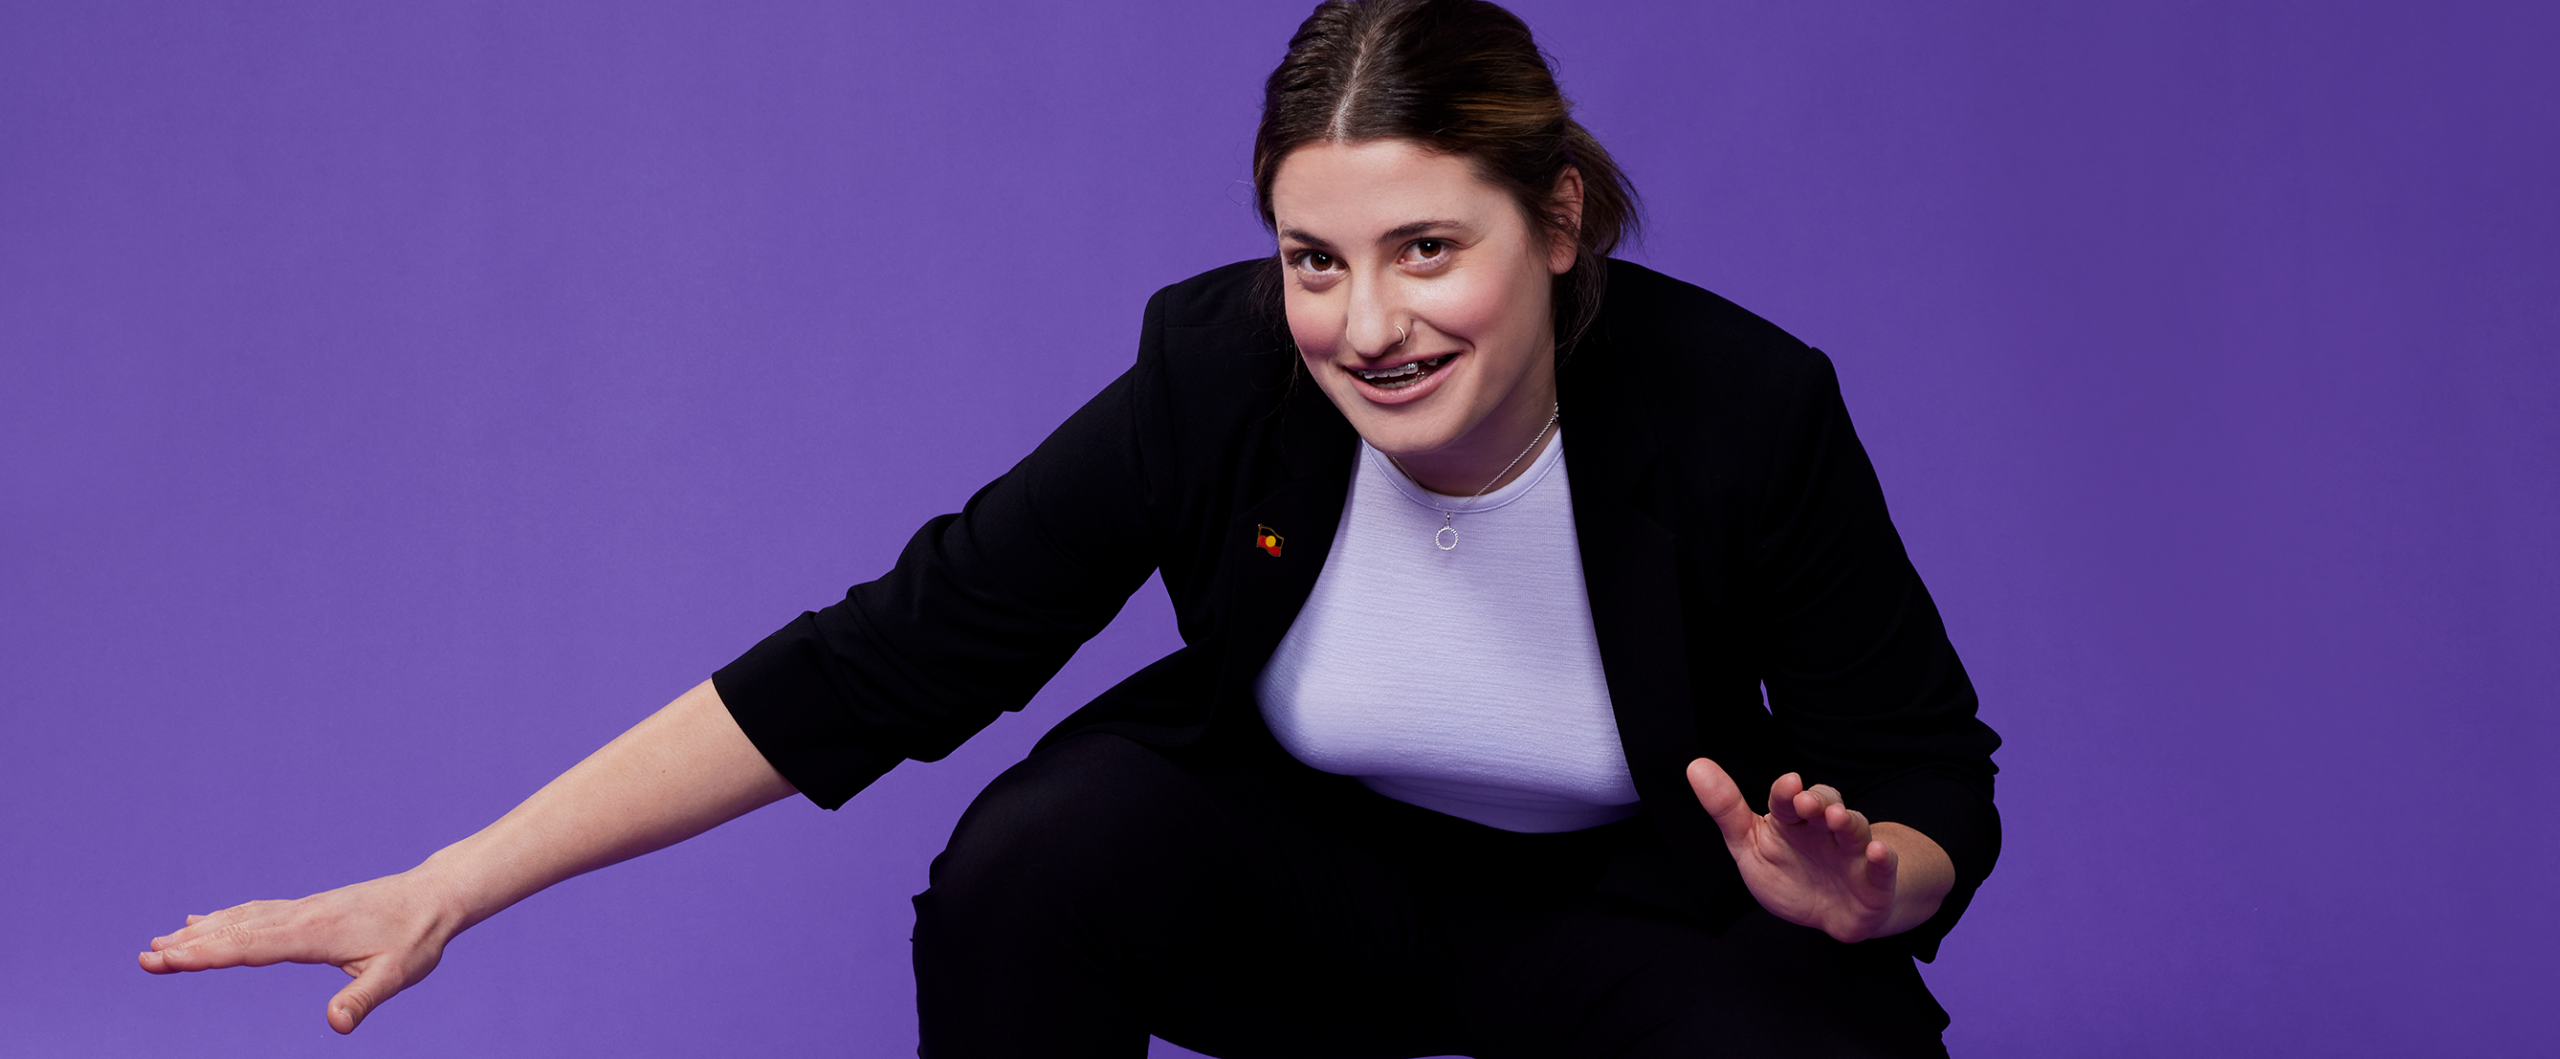 A woman wearing a suit squatting down with both arms out in quite a fun pose in front of a purple background.